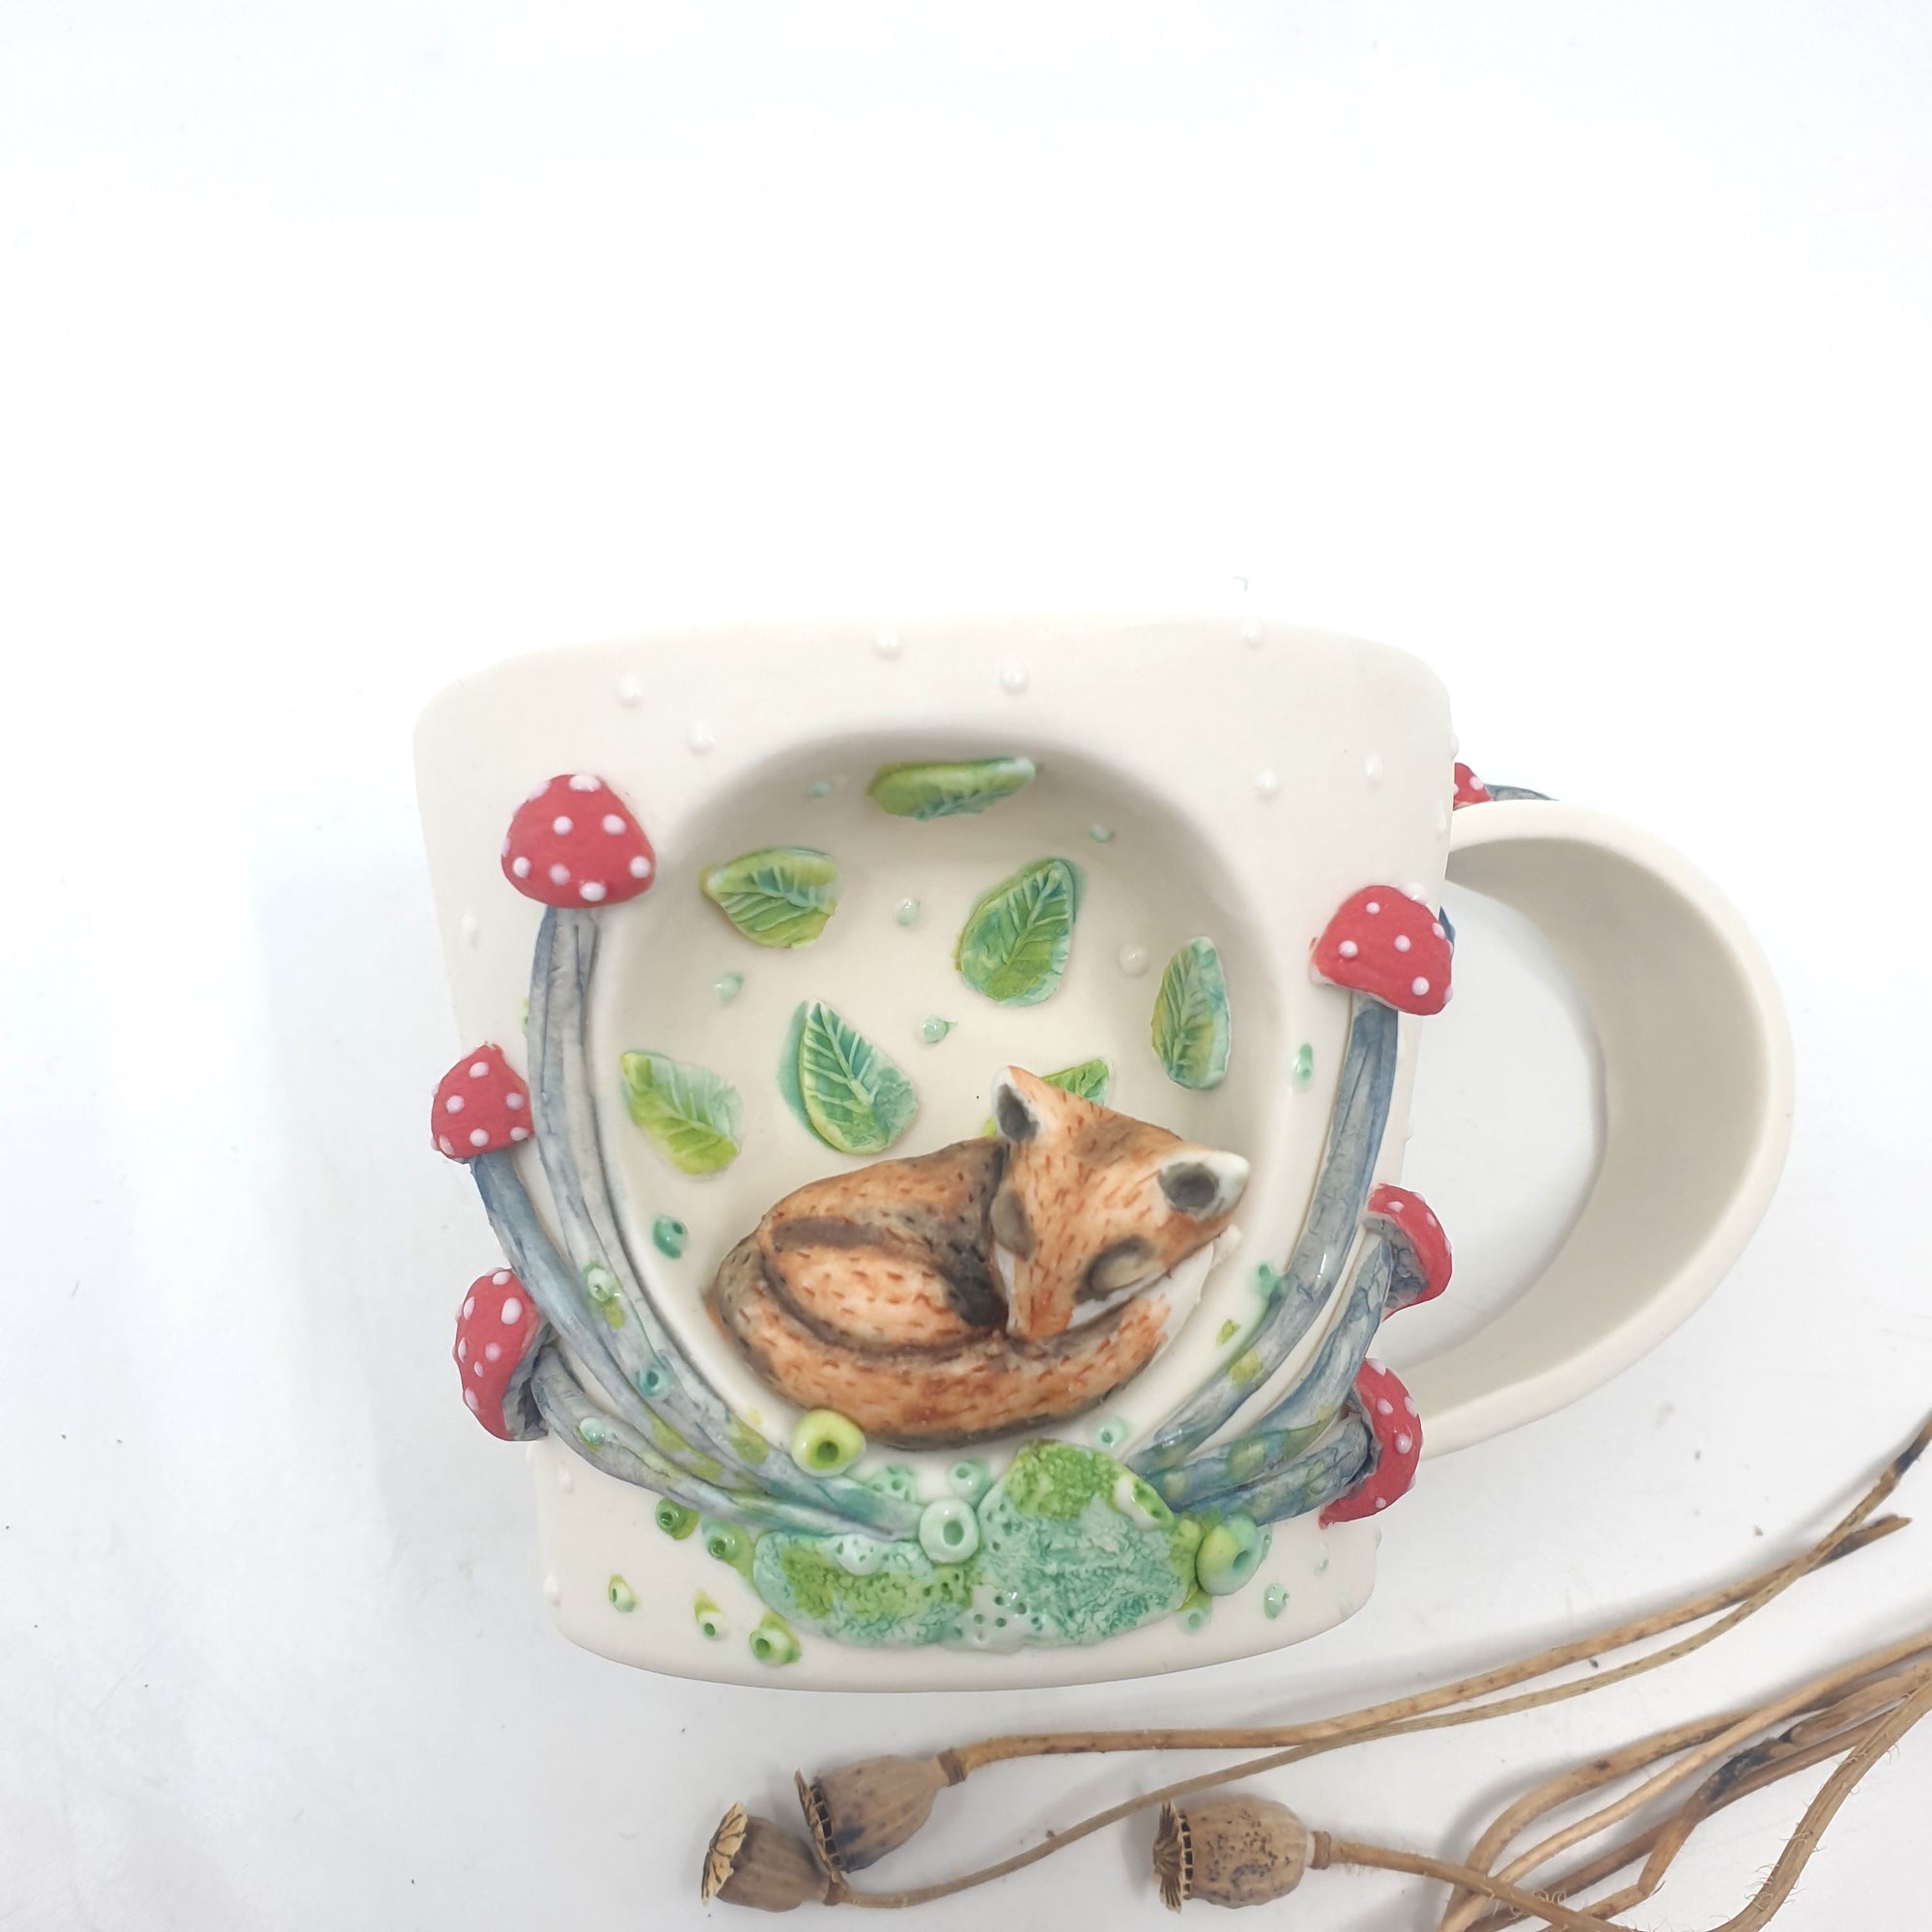 Porcelain fox cup with red mushrooms and leaves